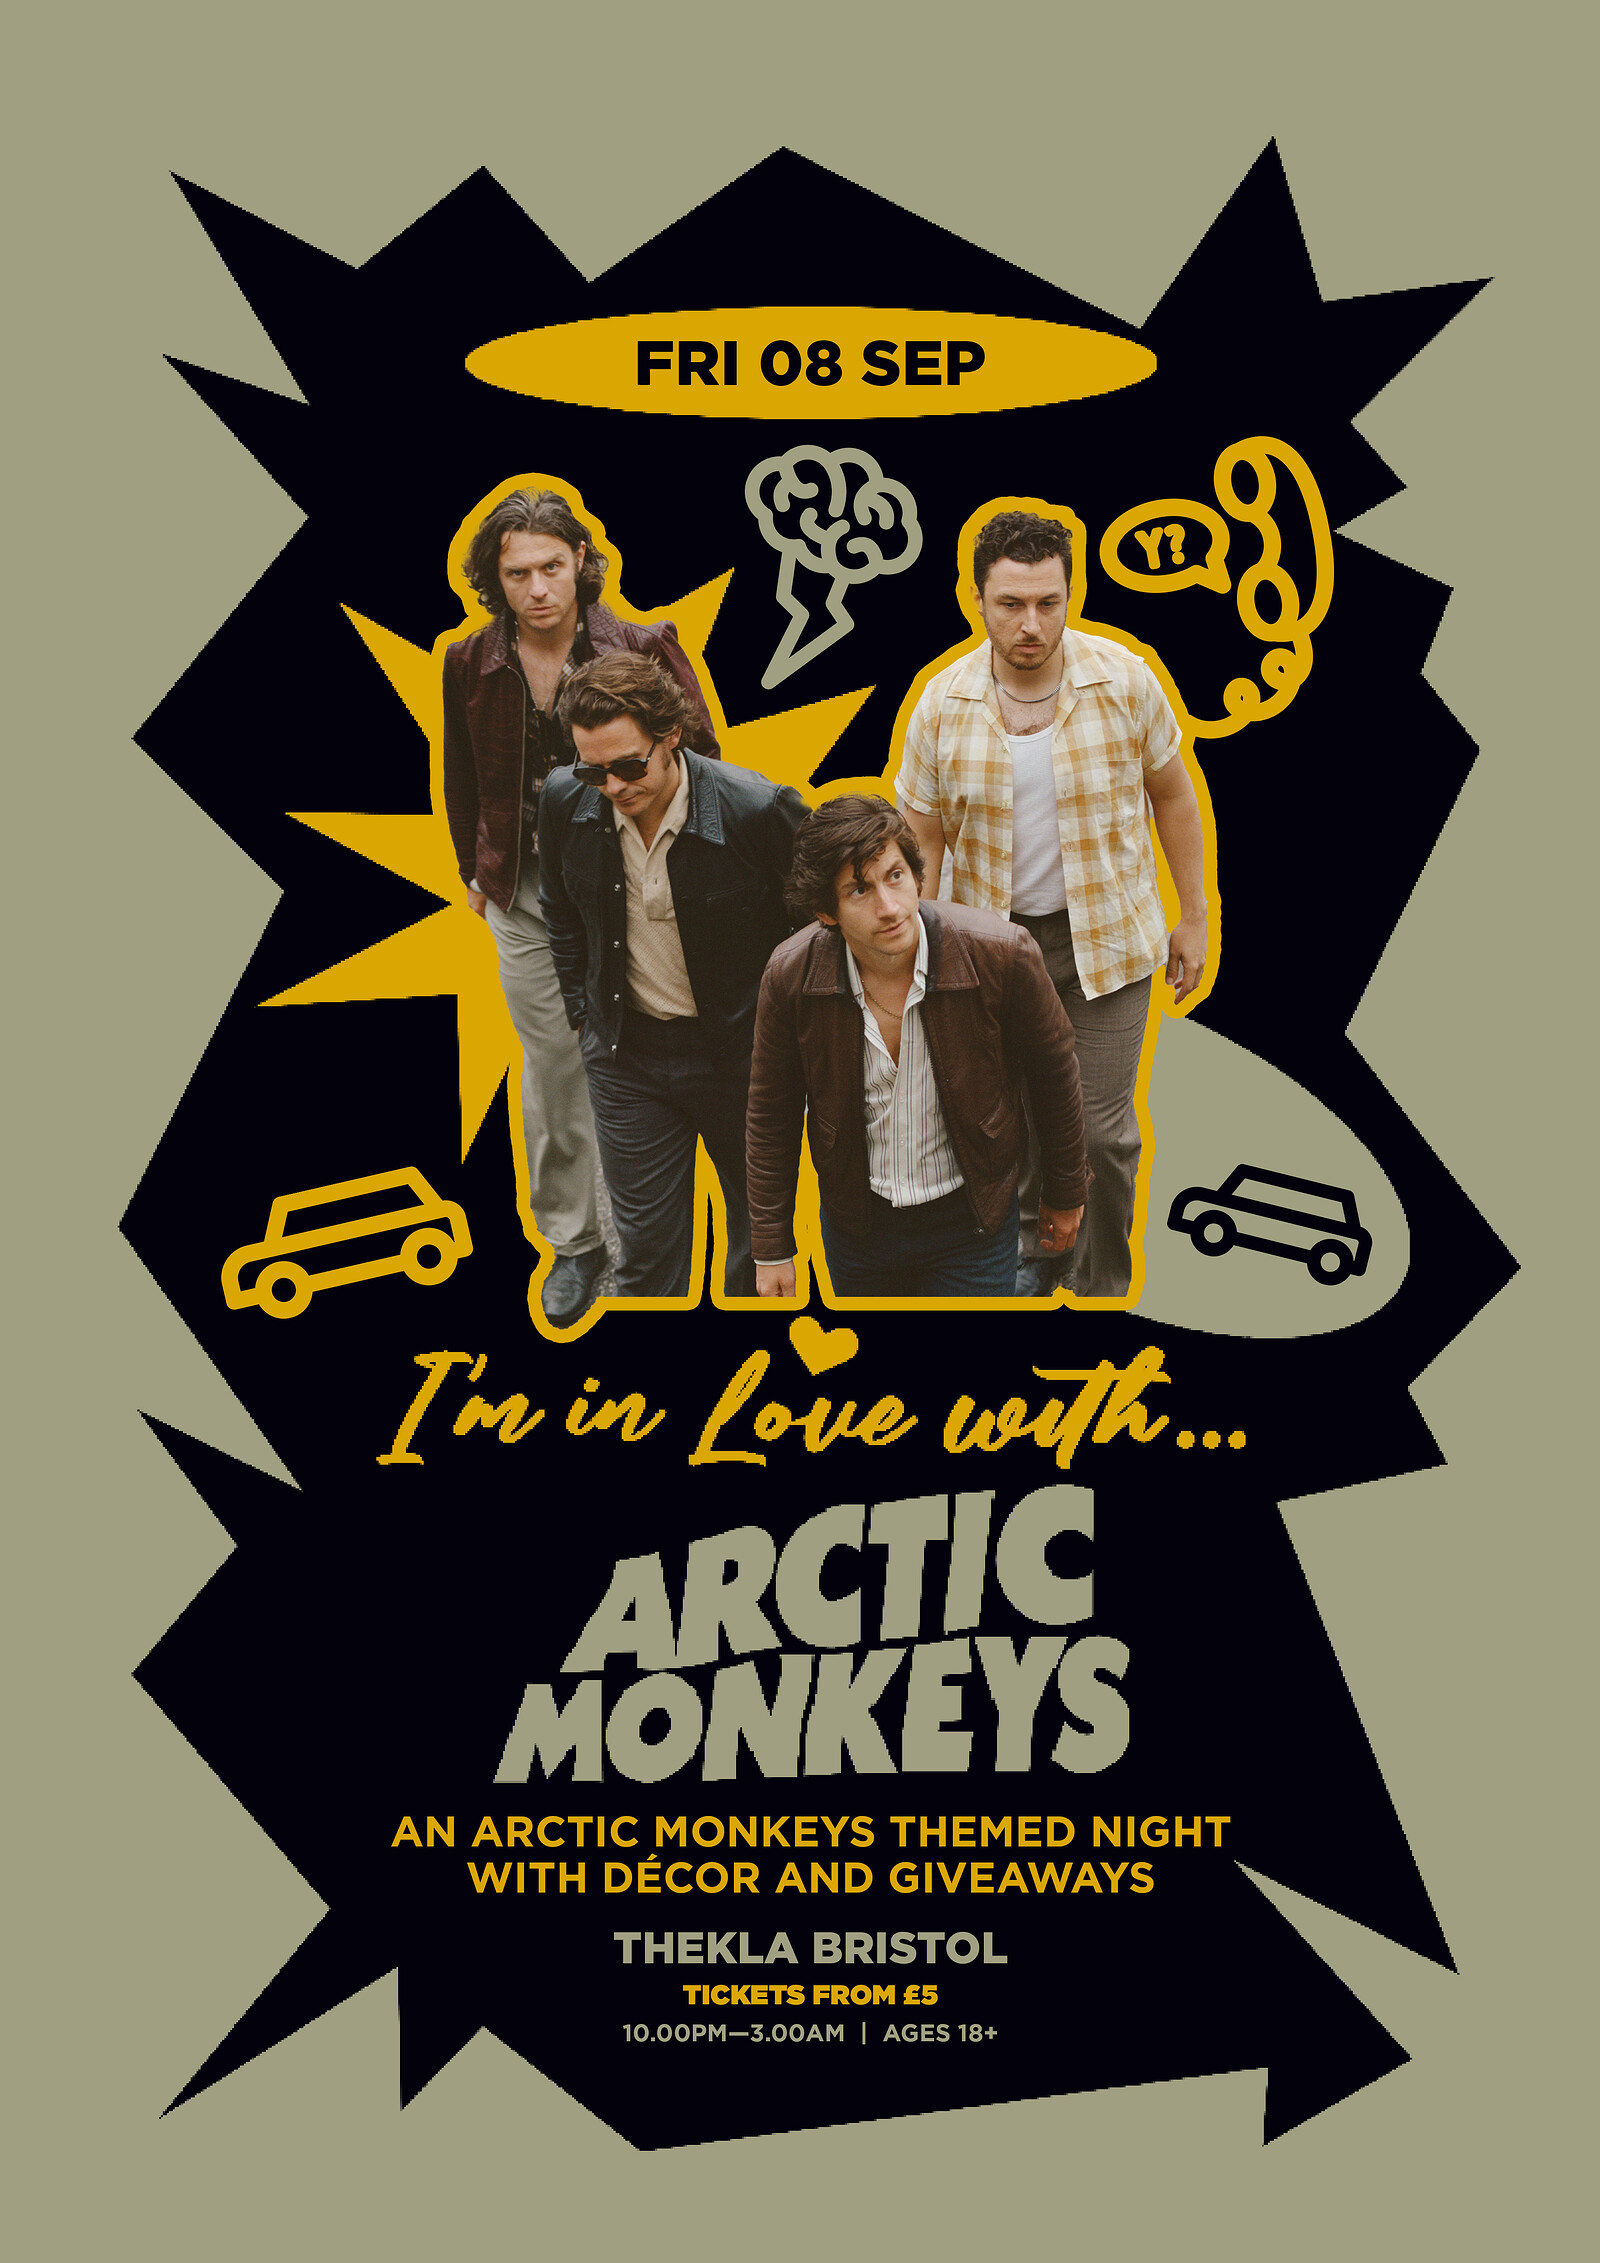 I'm In Love With... Arctic Monkeys at Thekla